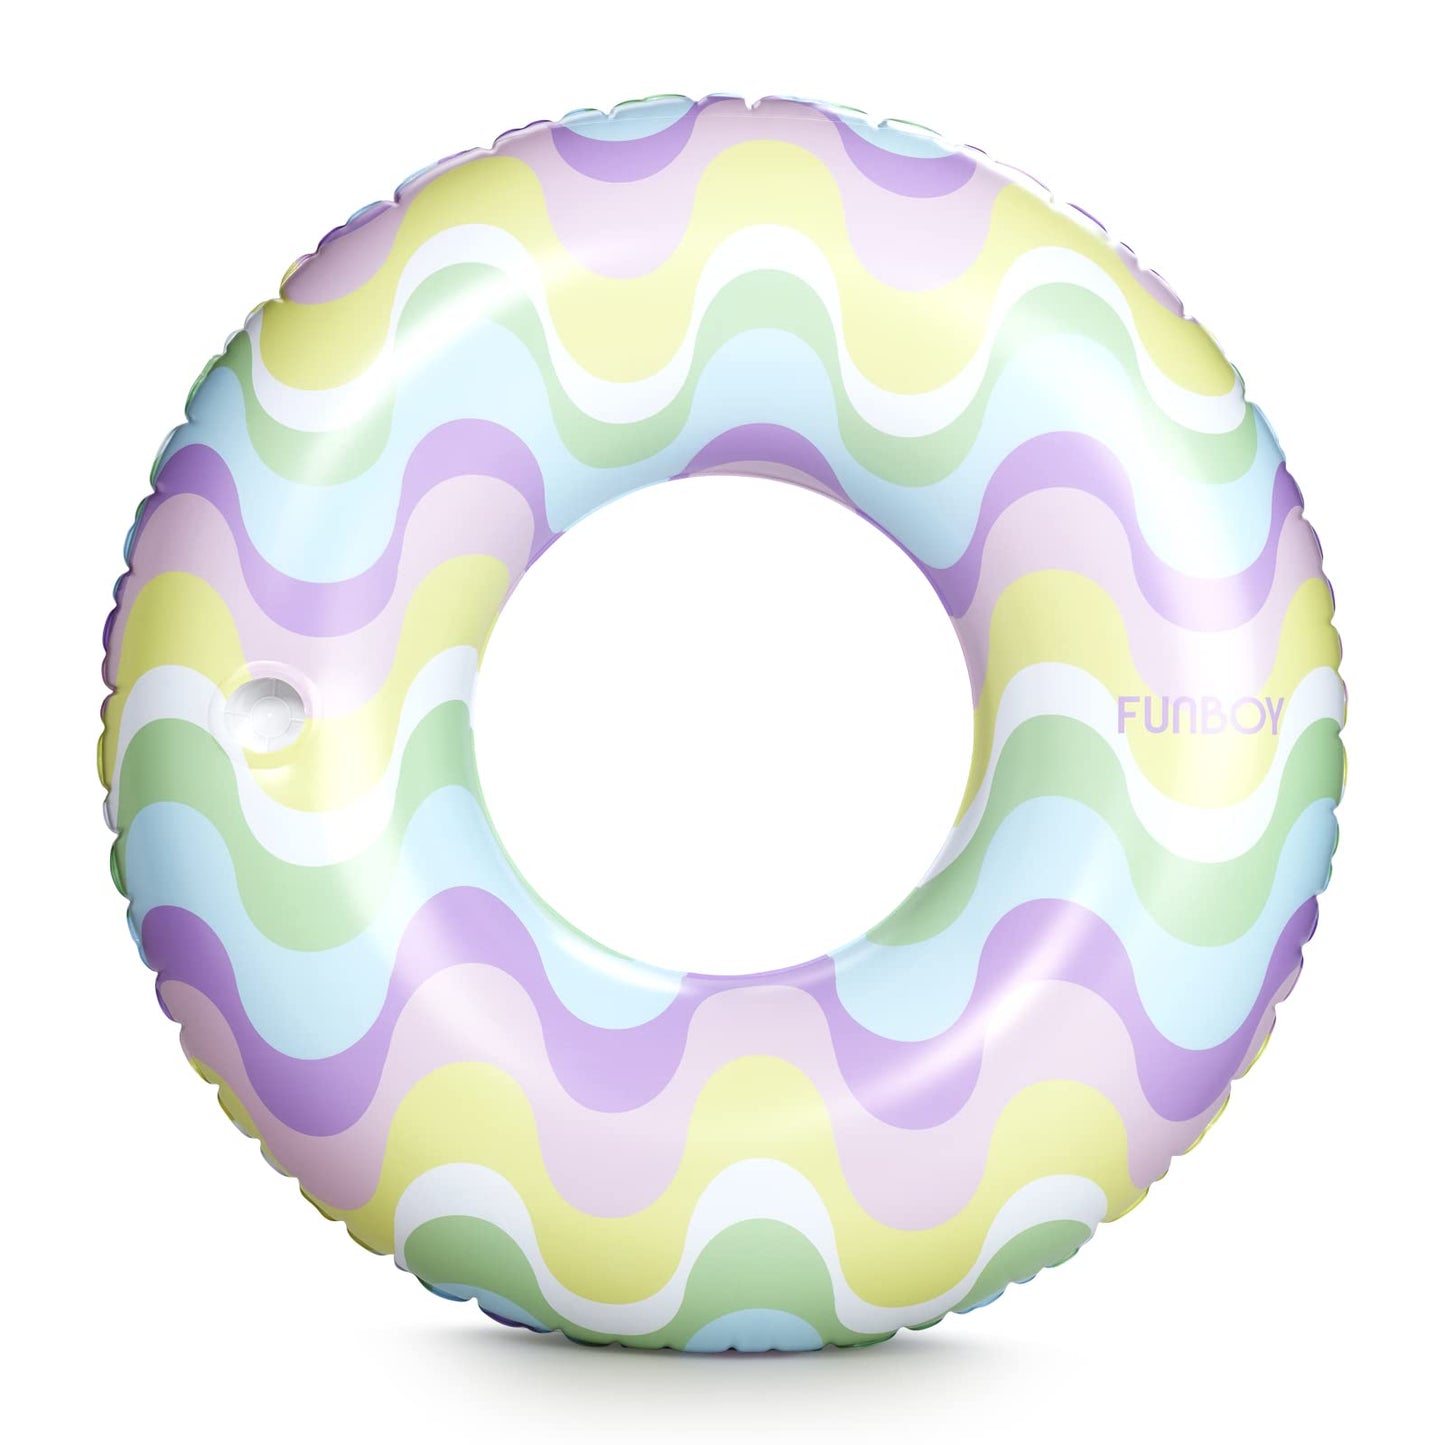 FUNBOY Giant Inflatable 70s Retro Wave Retro Tube Float, Donut Style Pool Float, Luxury Raft for Summer Pool Parties and Entertainment 70's Wave Retro